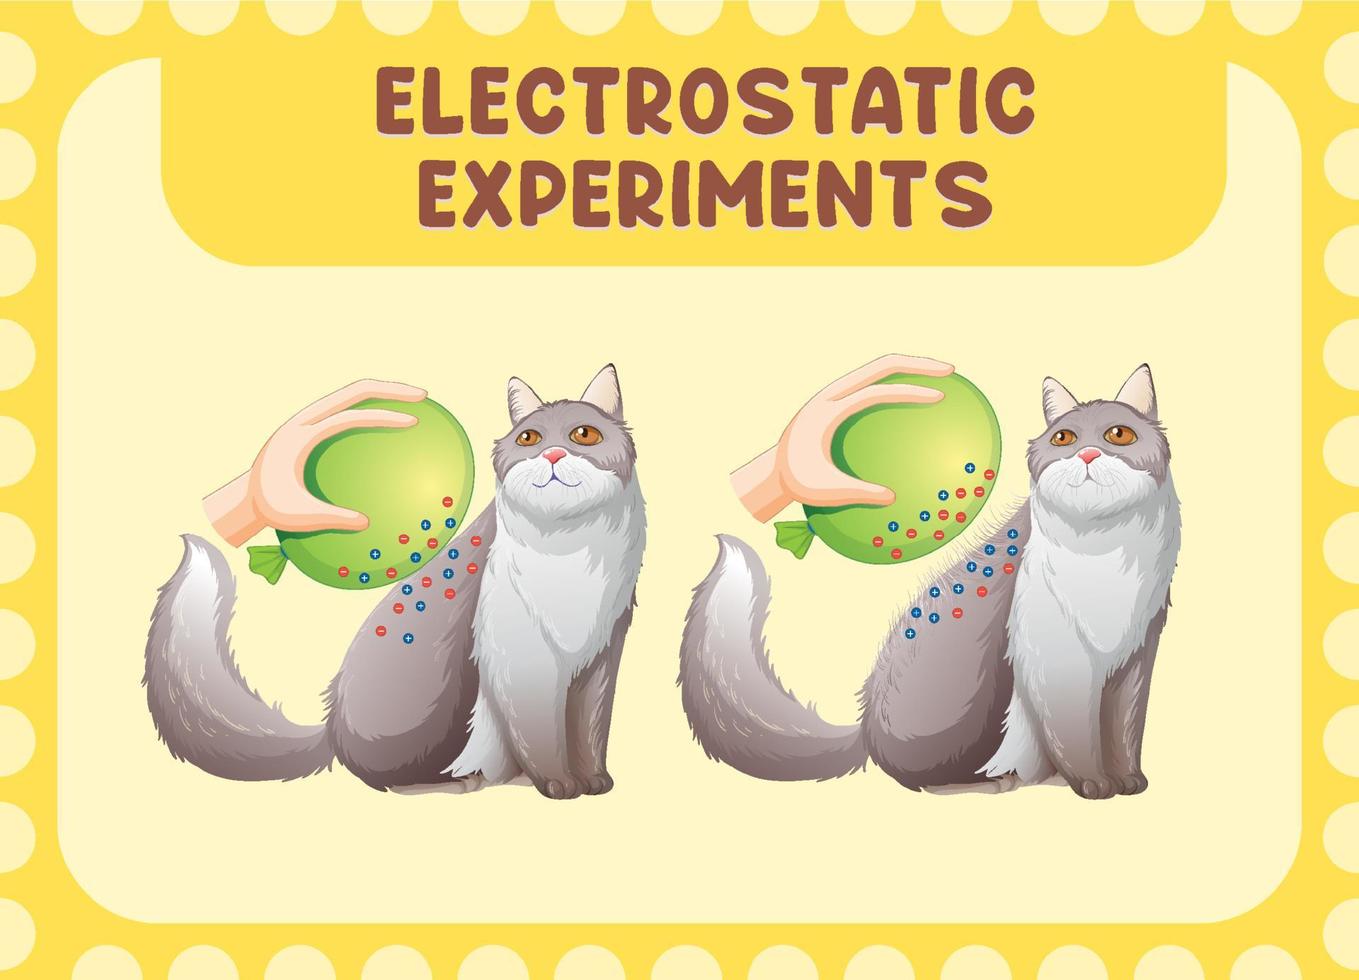 Electrostatic science experiment poster vector